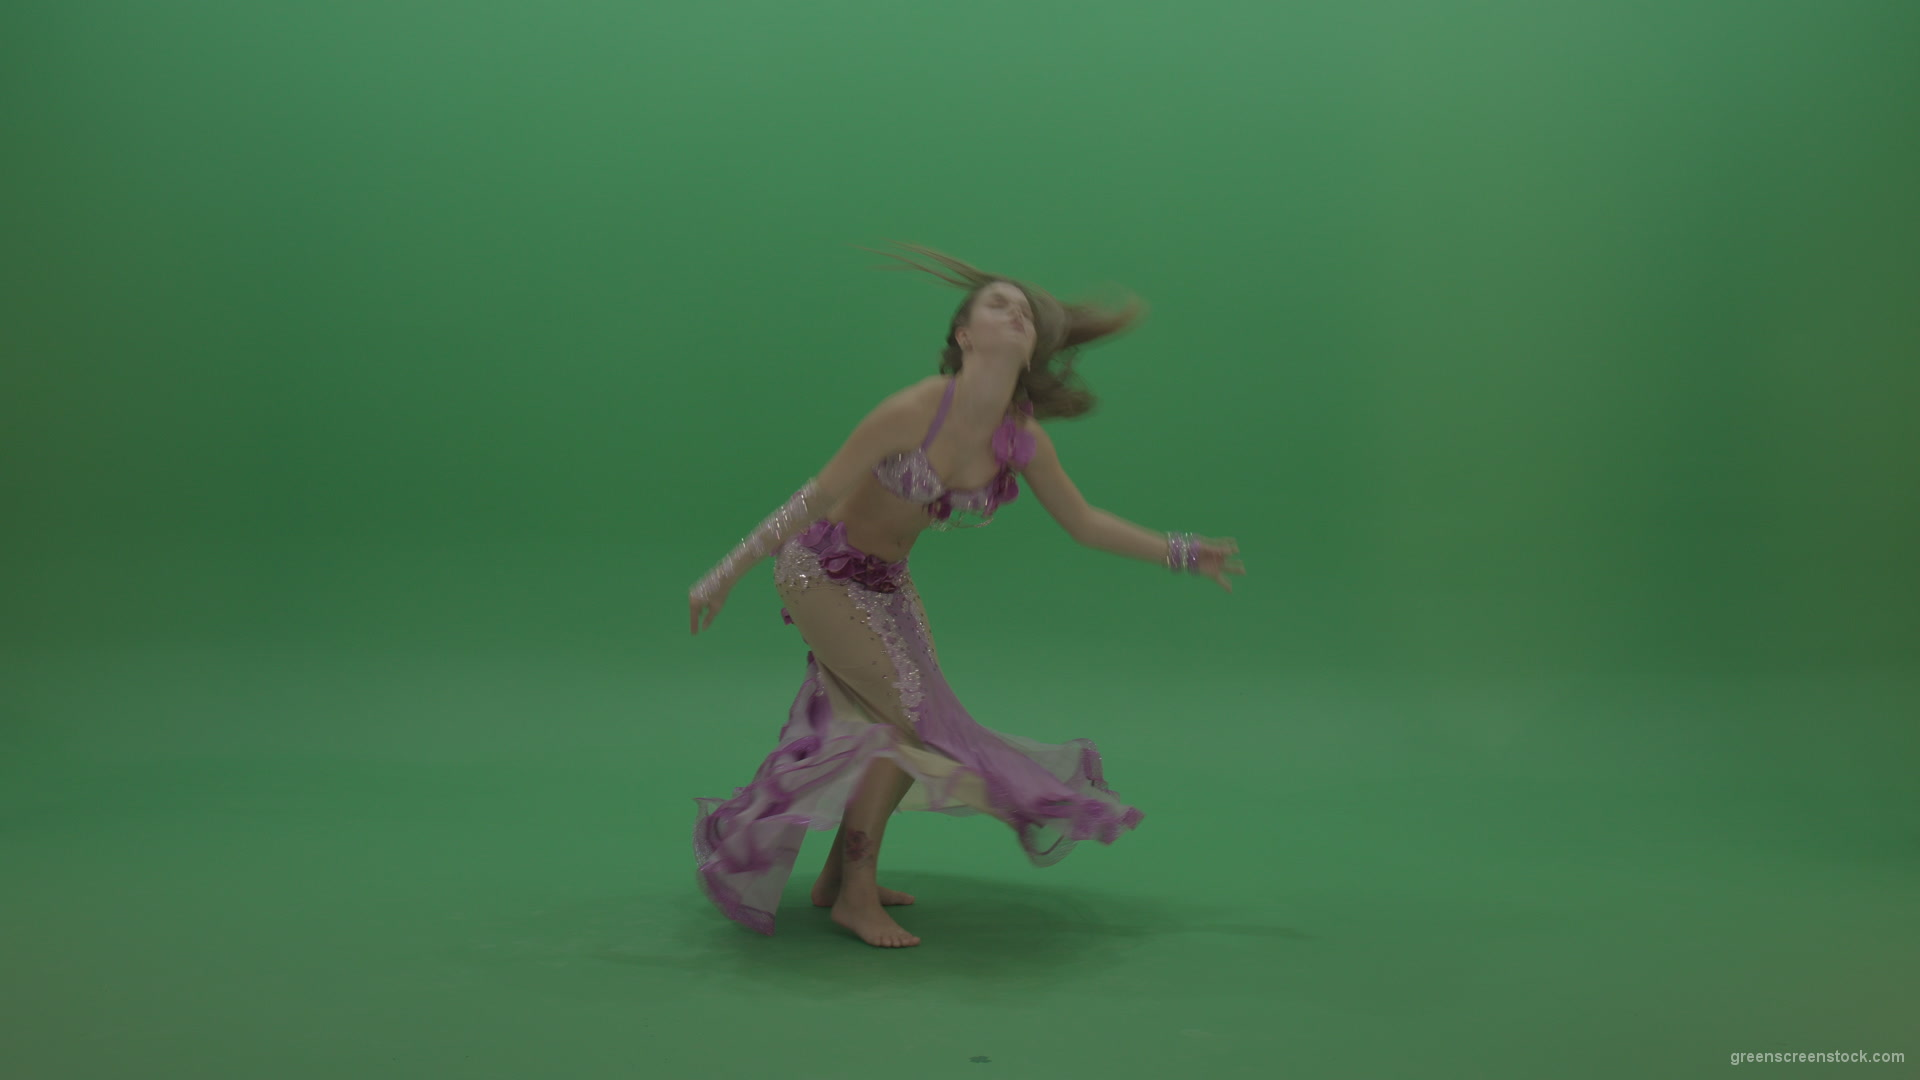 Sightly-belly-dancer-in-pink-wear-display-amazing-dance-moves-over-chromakey-background_007 Green Screen Stock